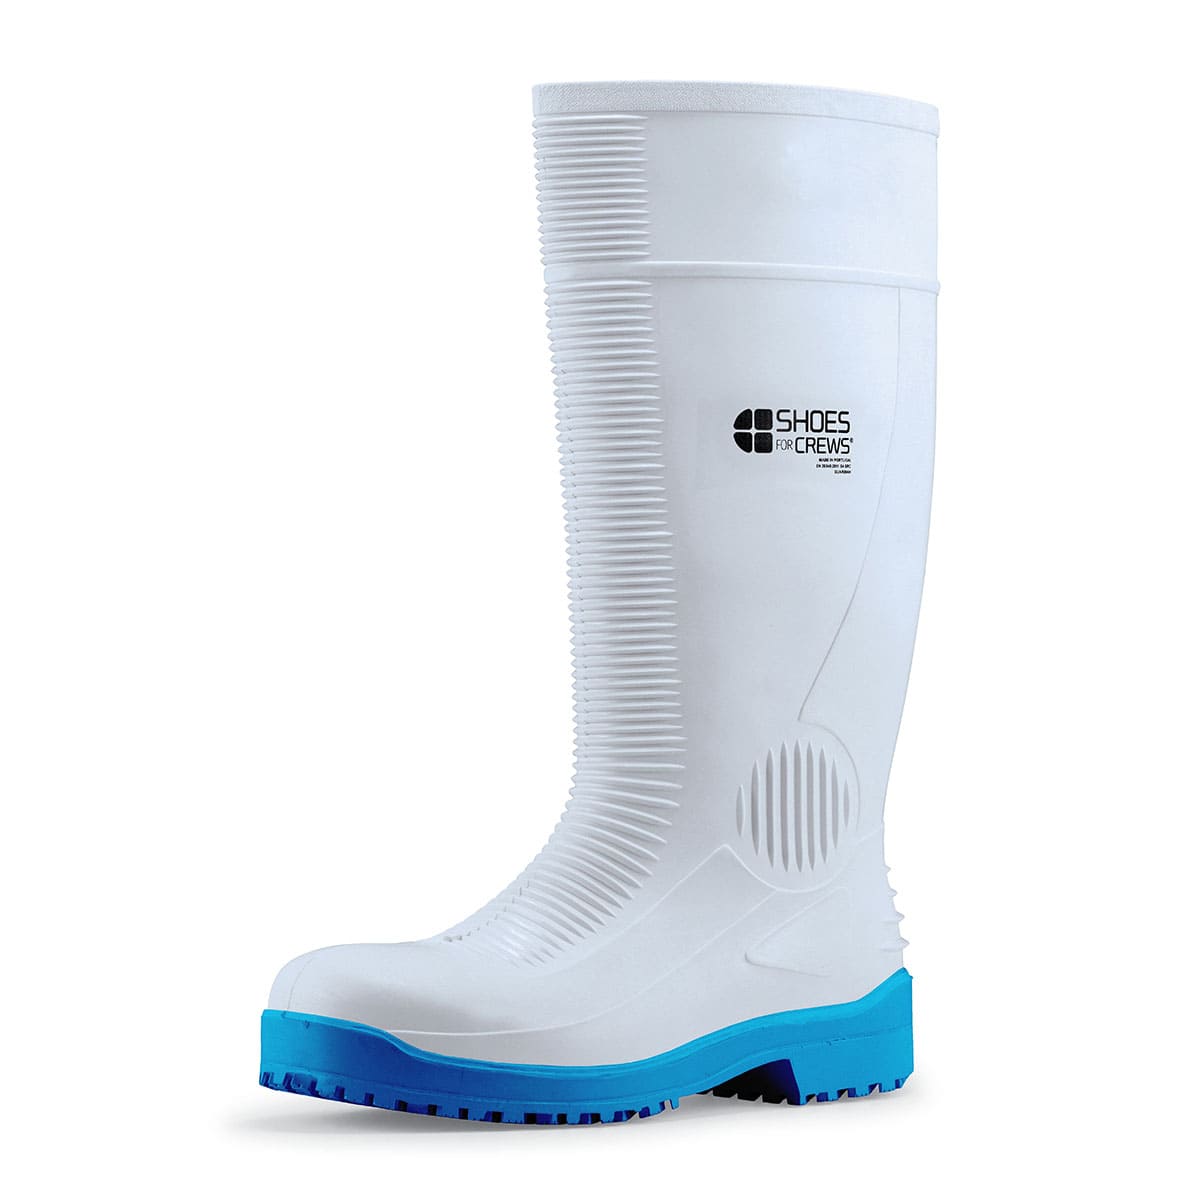 The Guardian S4 from Shoes For Crews are waterproof Wellington boots that offer superior slip resistance on a variety of pavement surfaces, seen from the left profile.